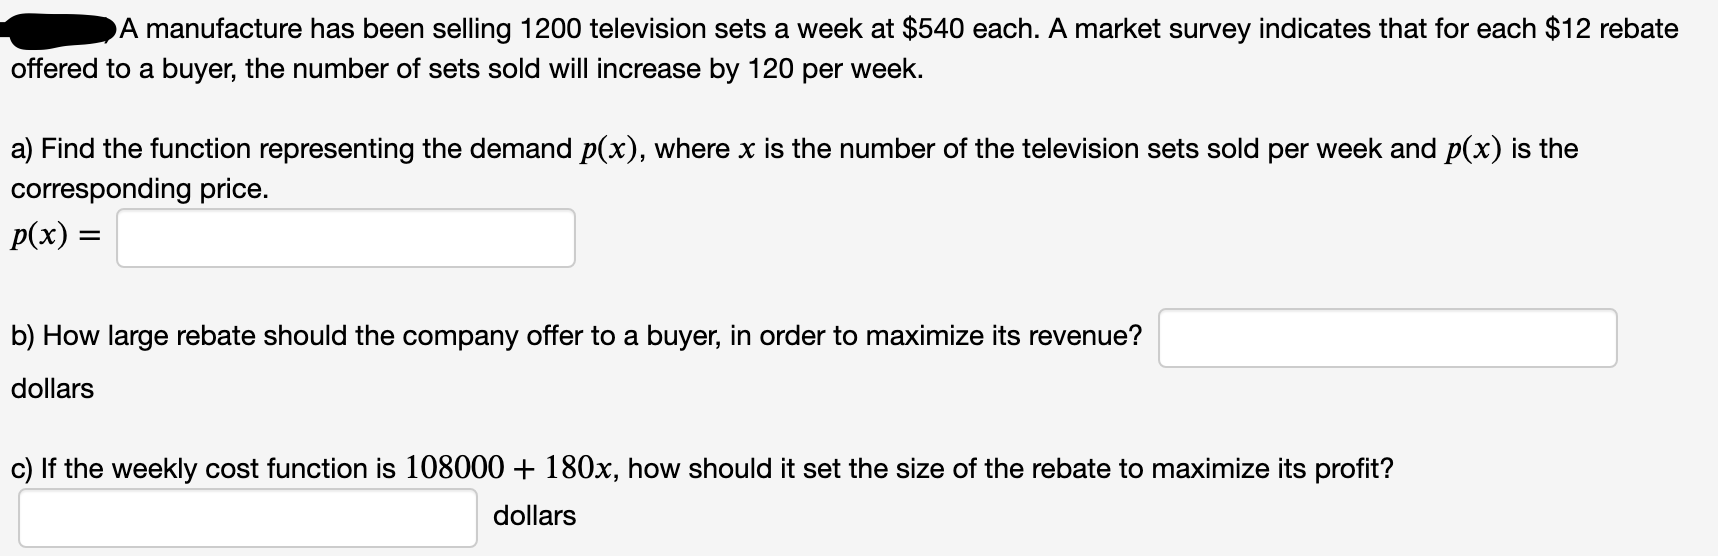 DA manufacture has been selling 1200 television sets a week at $540 each. A market survey indicates that for each $12 rebate
bffered to a buyer, the number of sets sold will increase by 120 per week.
a) Find the function representing the demand p(x), where x is the number of the television sets sold per week and p(x) is the
corresponding price.
p(x) =
b) How large rebate should the company offer to a buyer, in order to maximize its revenue?
dollars
c) If the weekly cost function is 108000 + 180x, how should it set the size of the rebate to maximize its profit?
dollars
